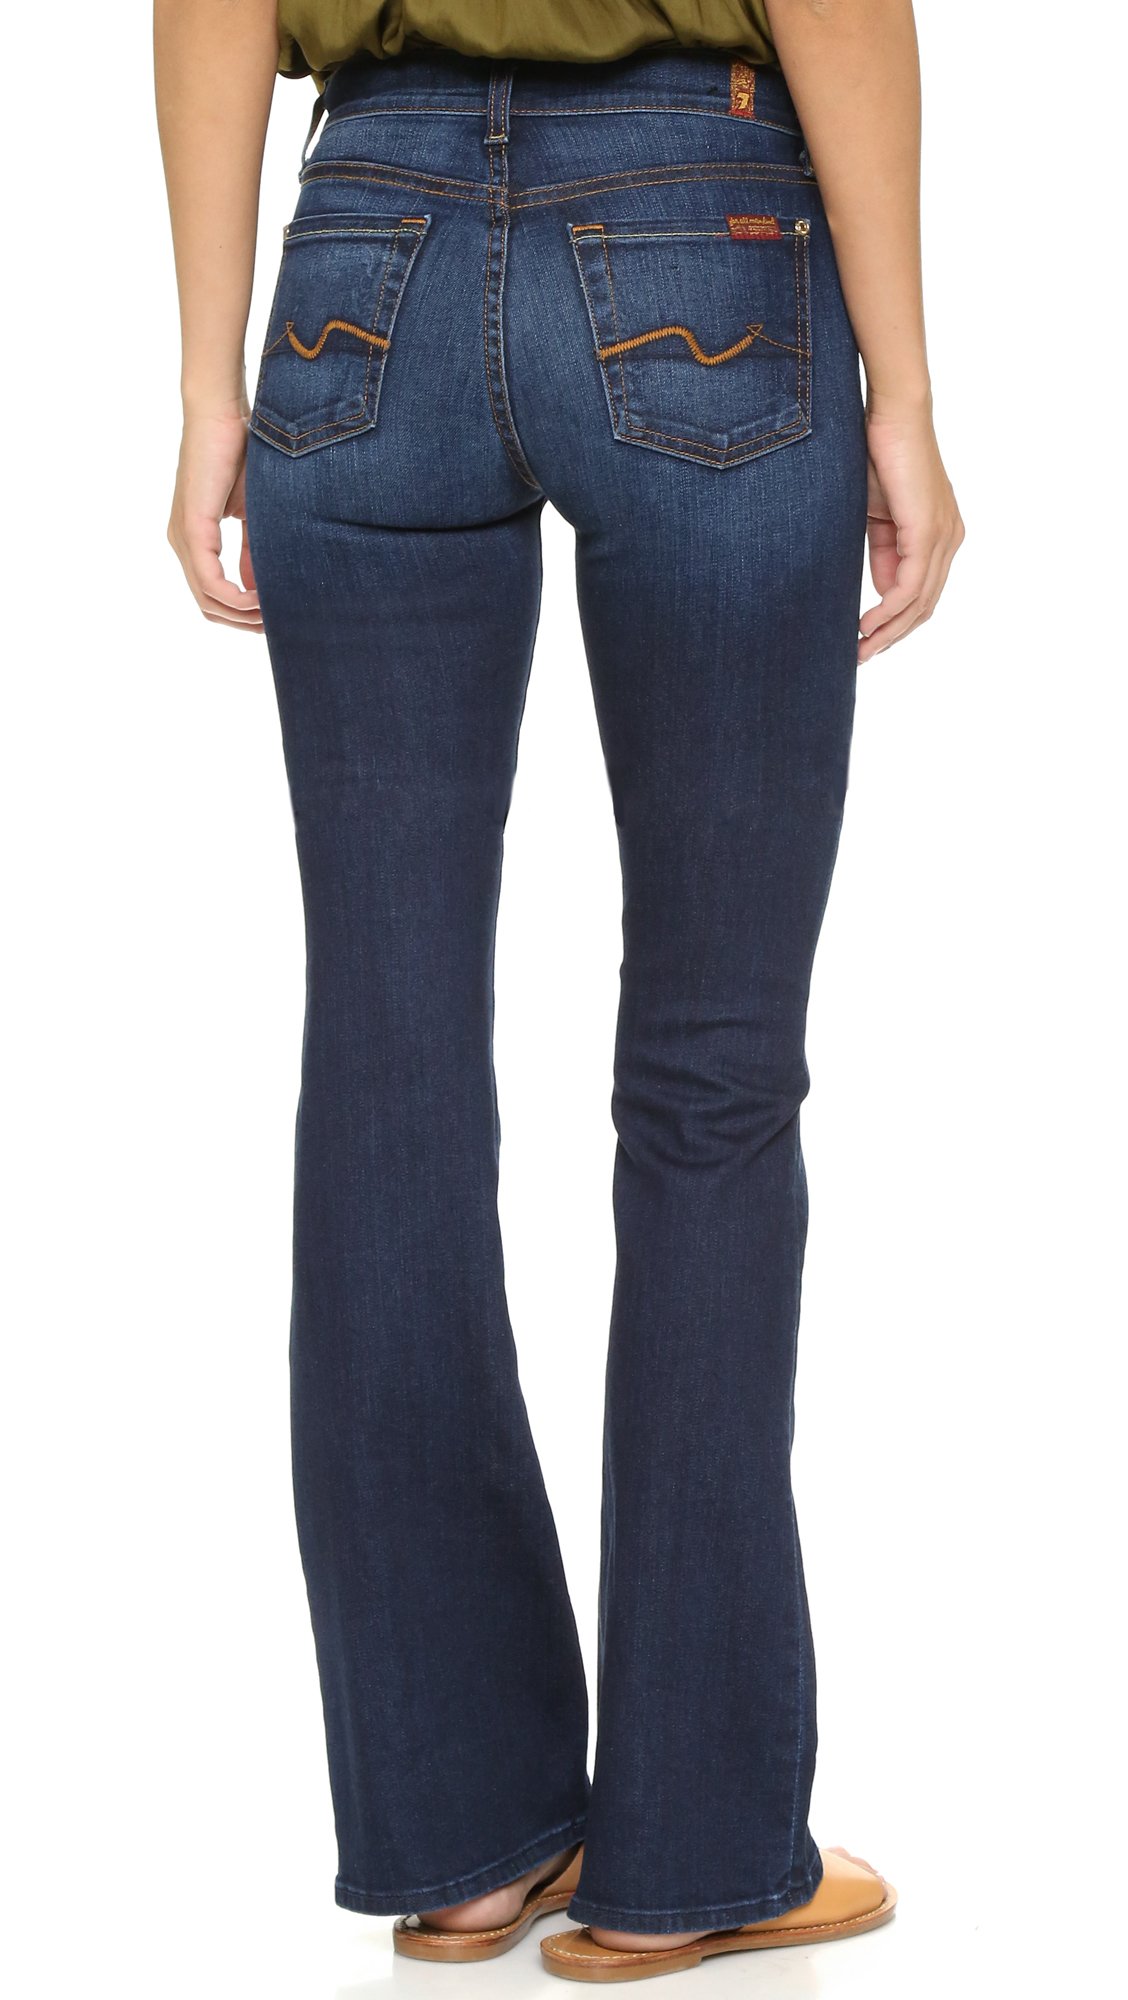 Lyst 7 For All Mankind Iconic Boot Cut Jeans in Blue